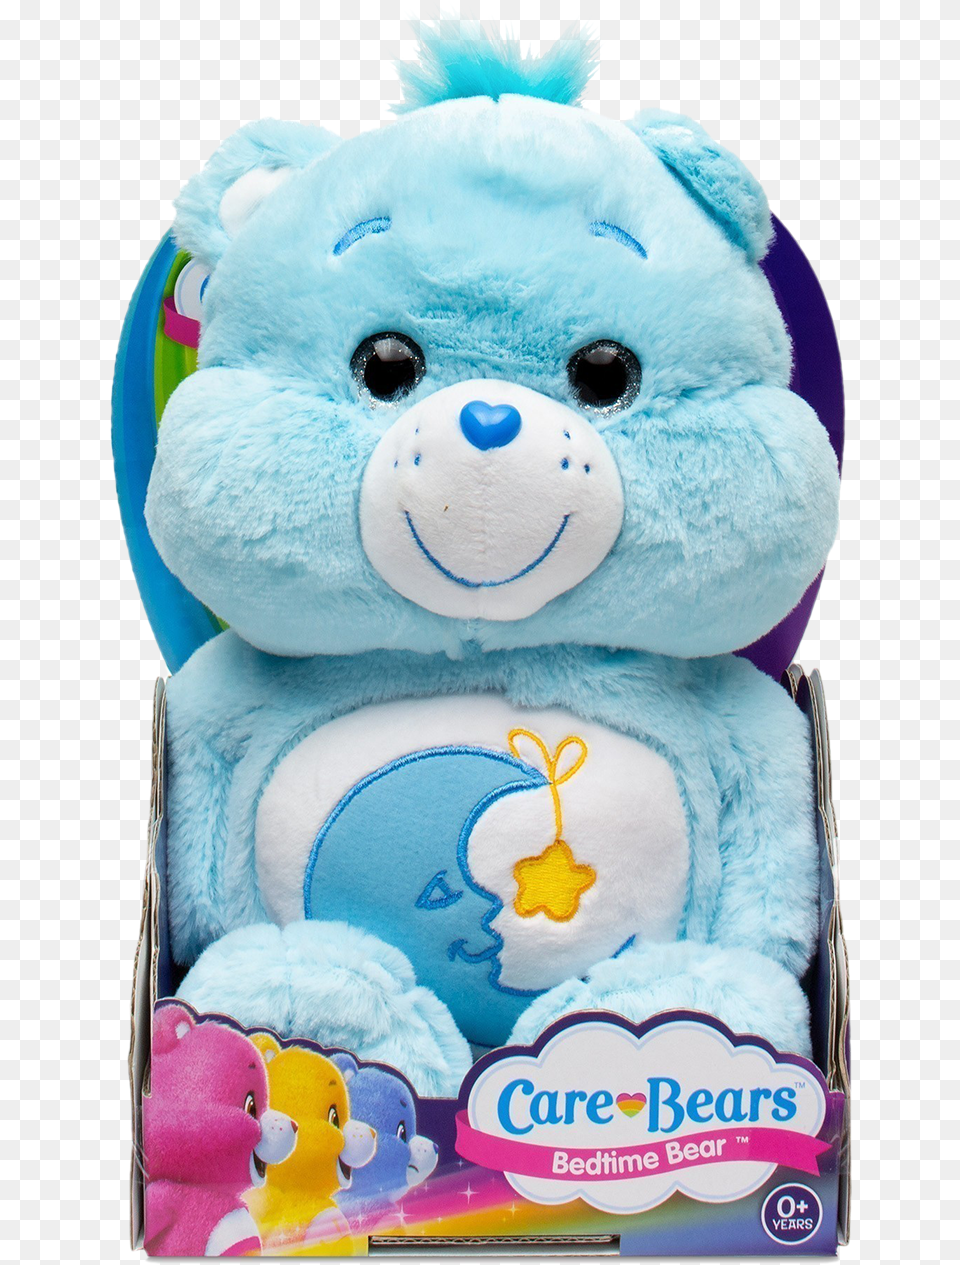 Bedtime Bear 12 Plush Fon Forge Care Bears Stuff Toys, Toy, Teddy Bear Free Png Download